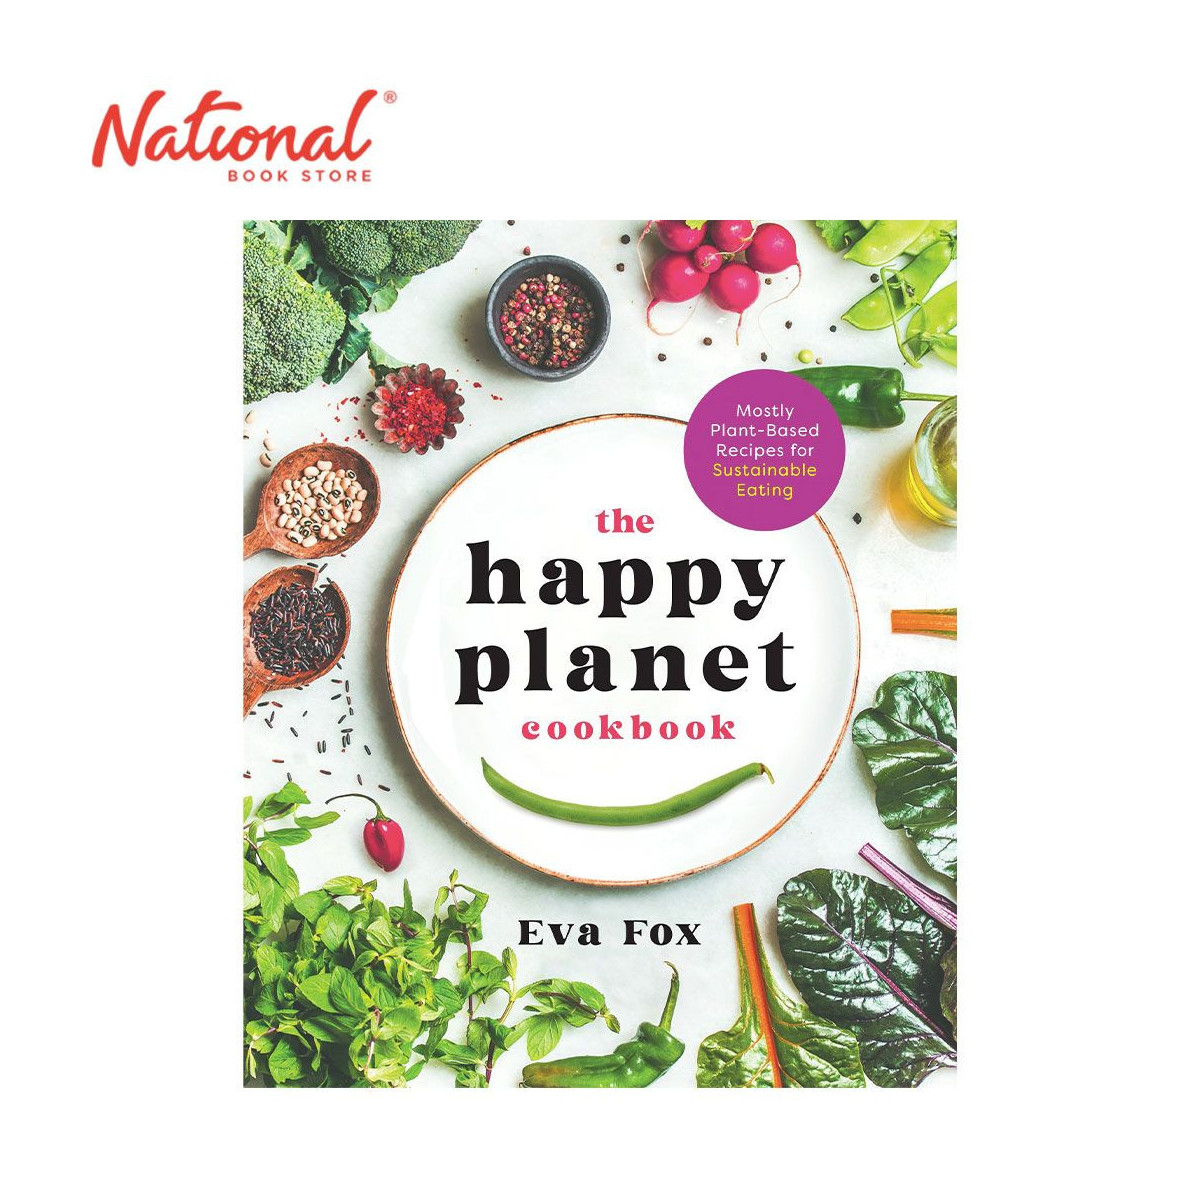 The Happy Planet Cookbook : Mostly Plant-Based Recipes for Sustainable Eating by Eva Fox - Hardcover